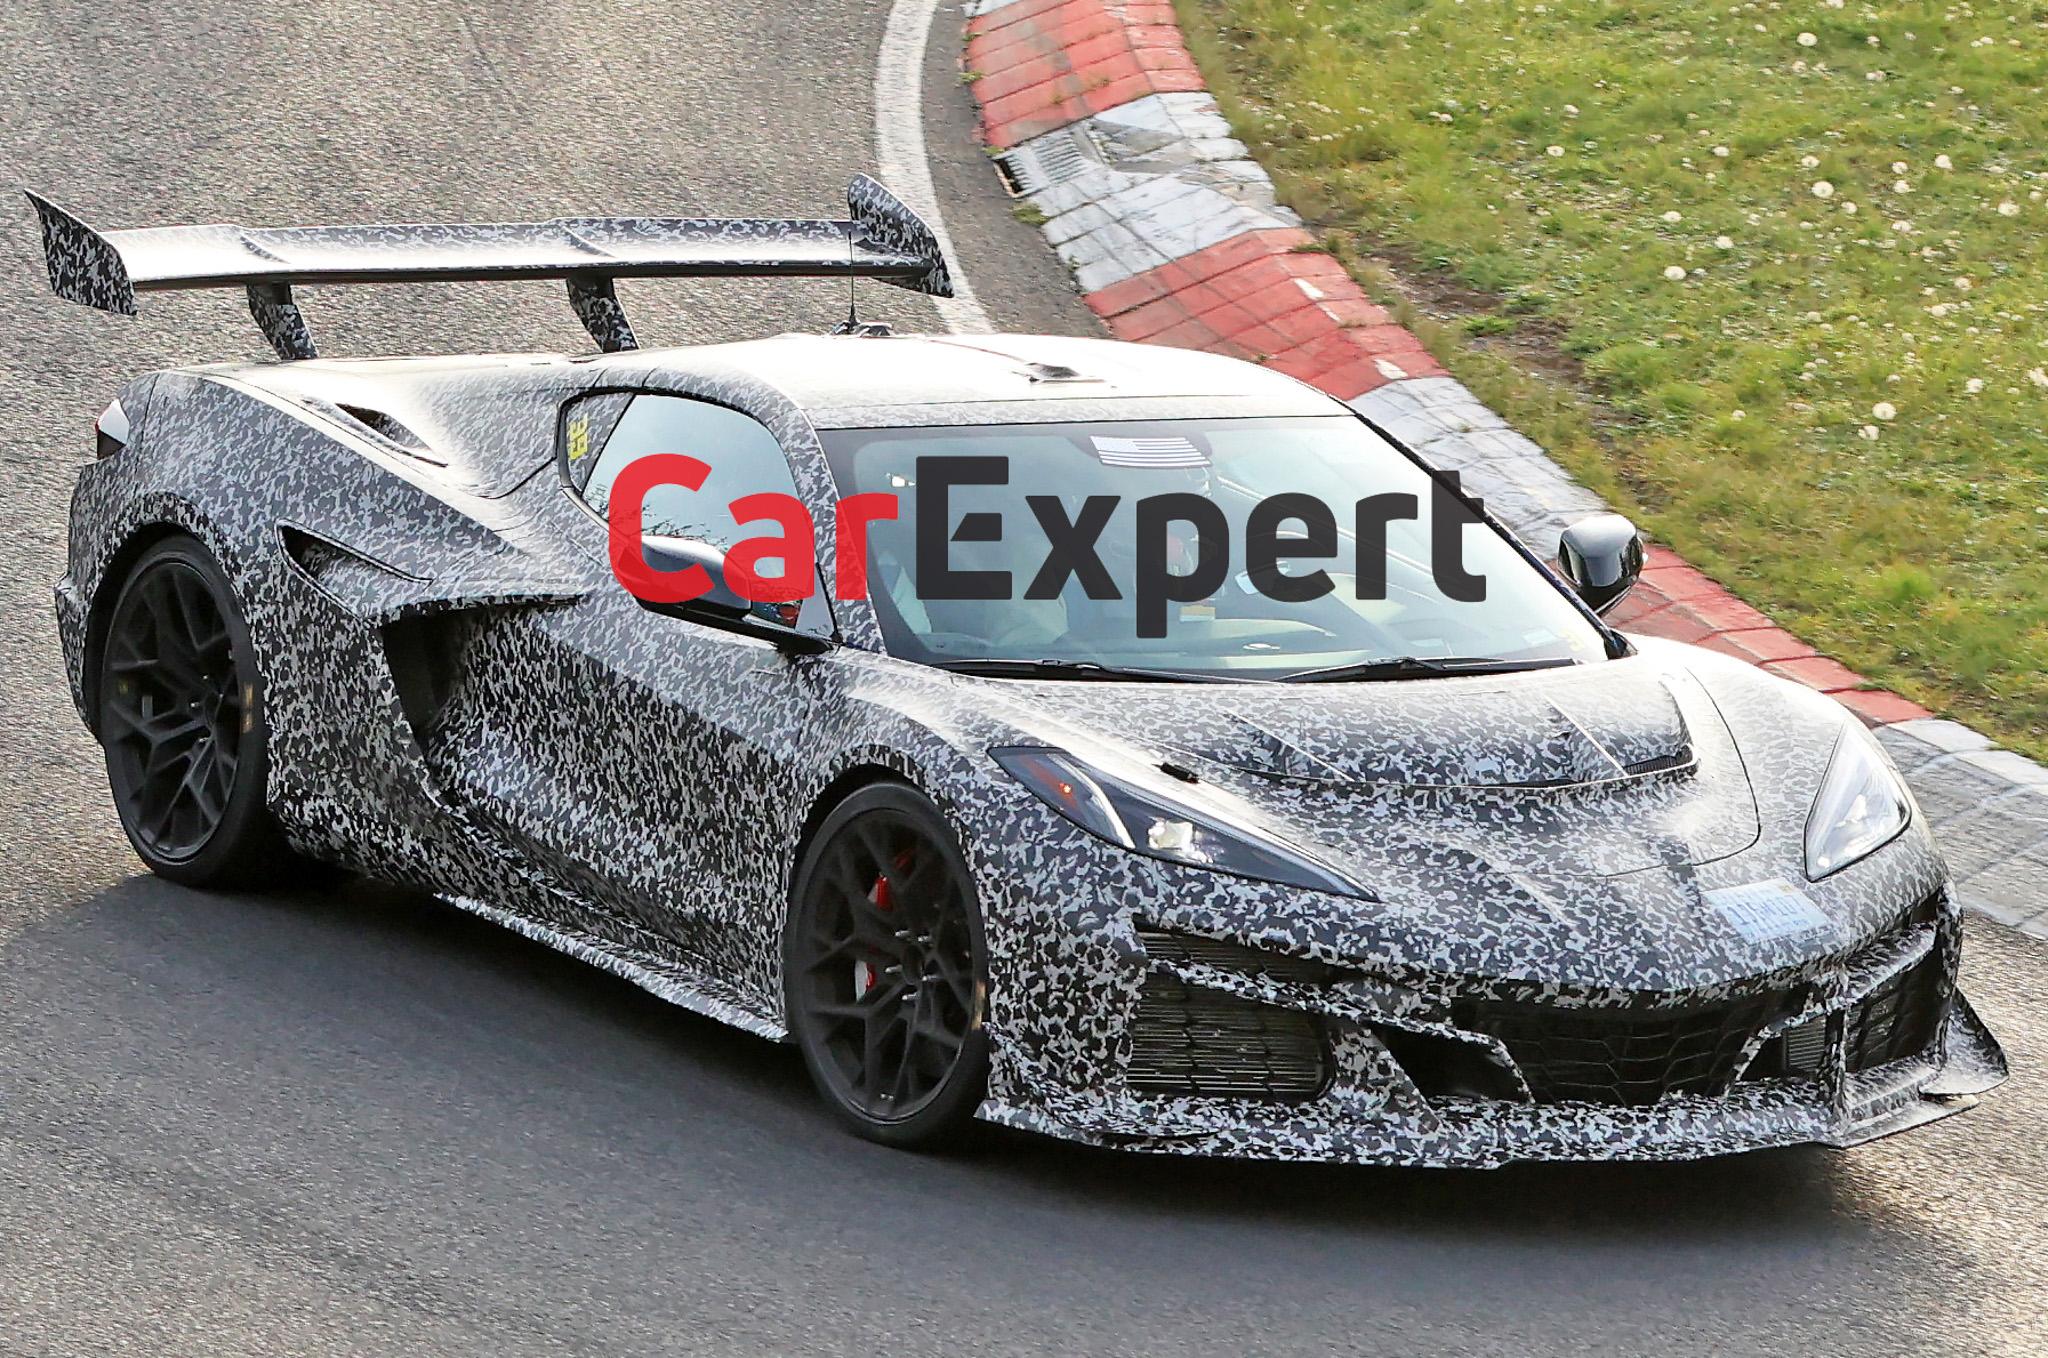 2025 chevrolet corvette zr1 teased as gm’s hottest mid-engine sports car ever